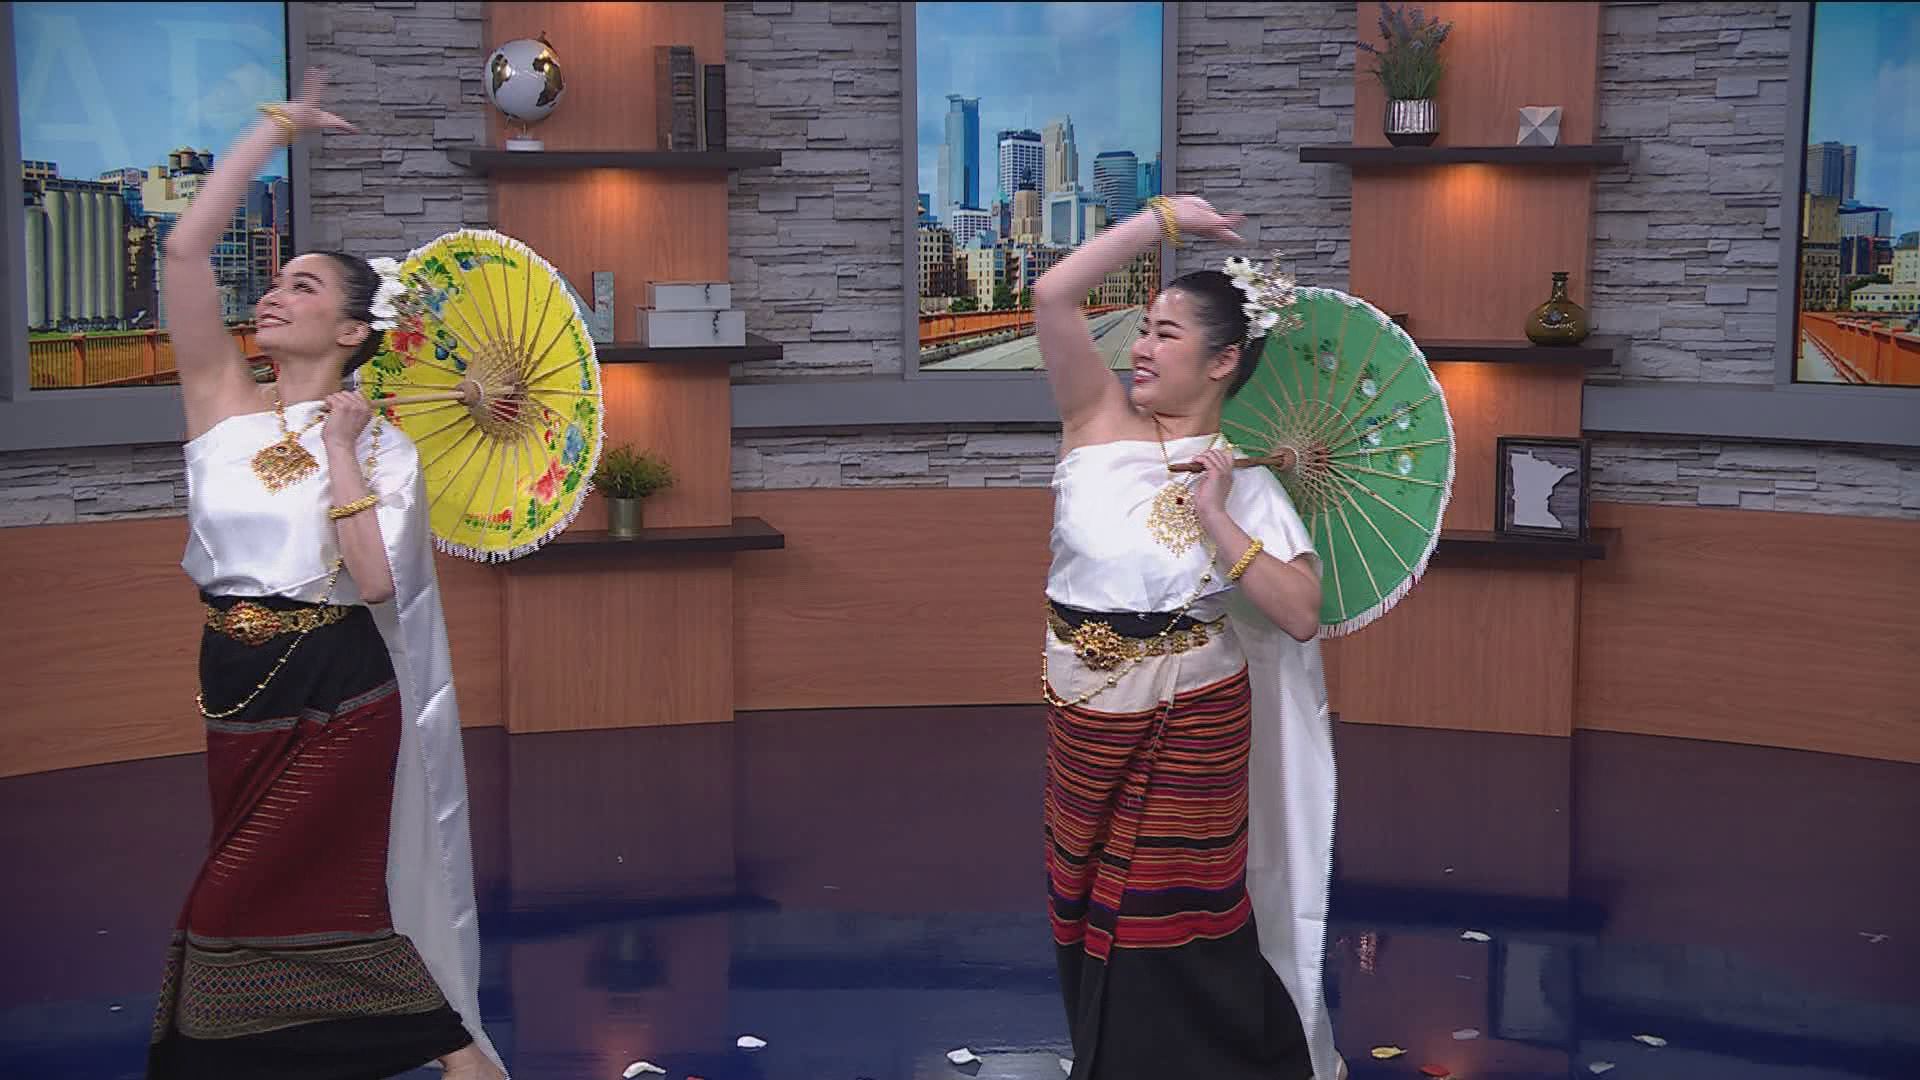 Thai Cultural Council of Minnesota's Program Director, Lydia ThaiThai, joined KARE 11 Noon to discuss the history of the festival and its significance.